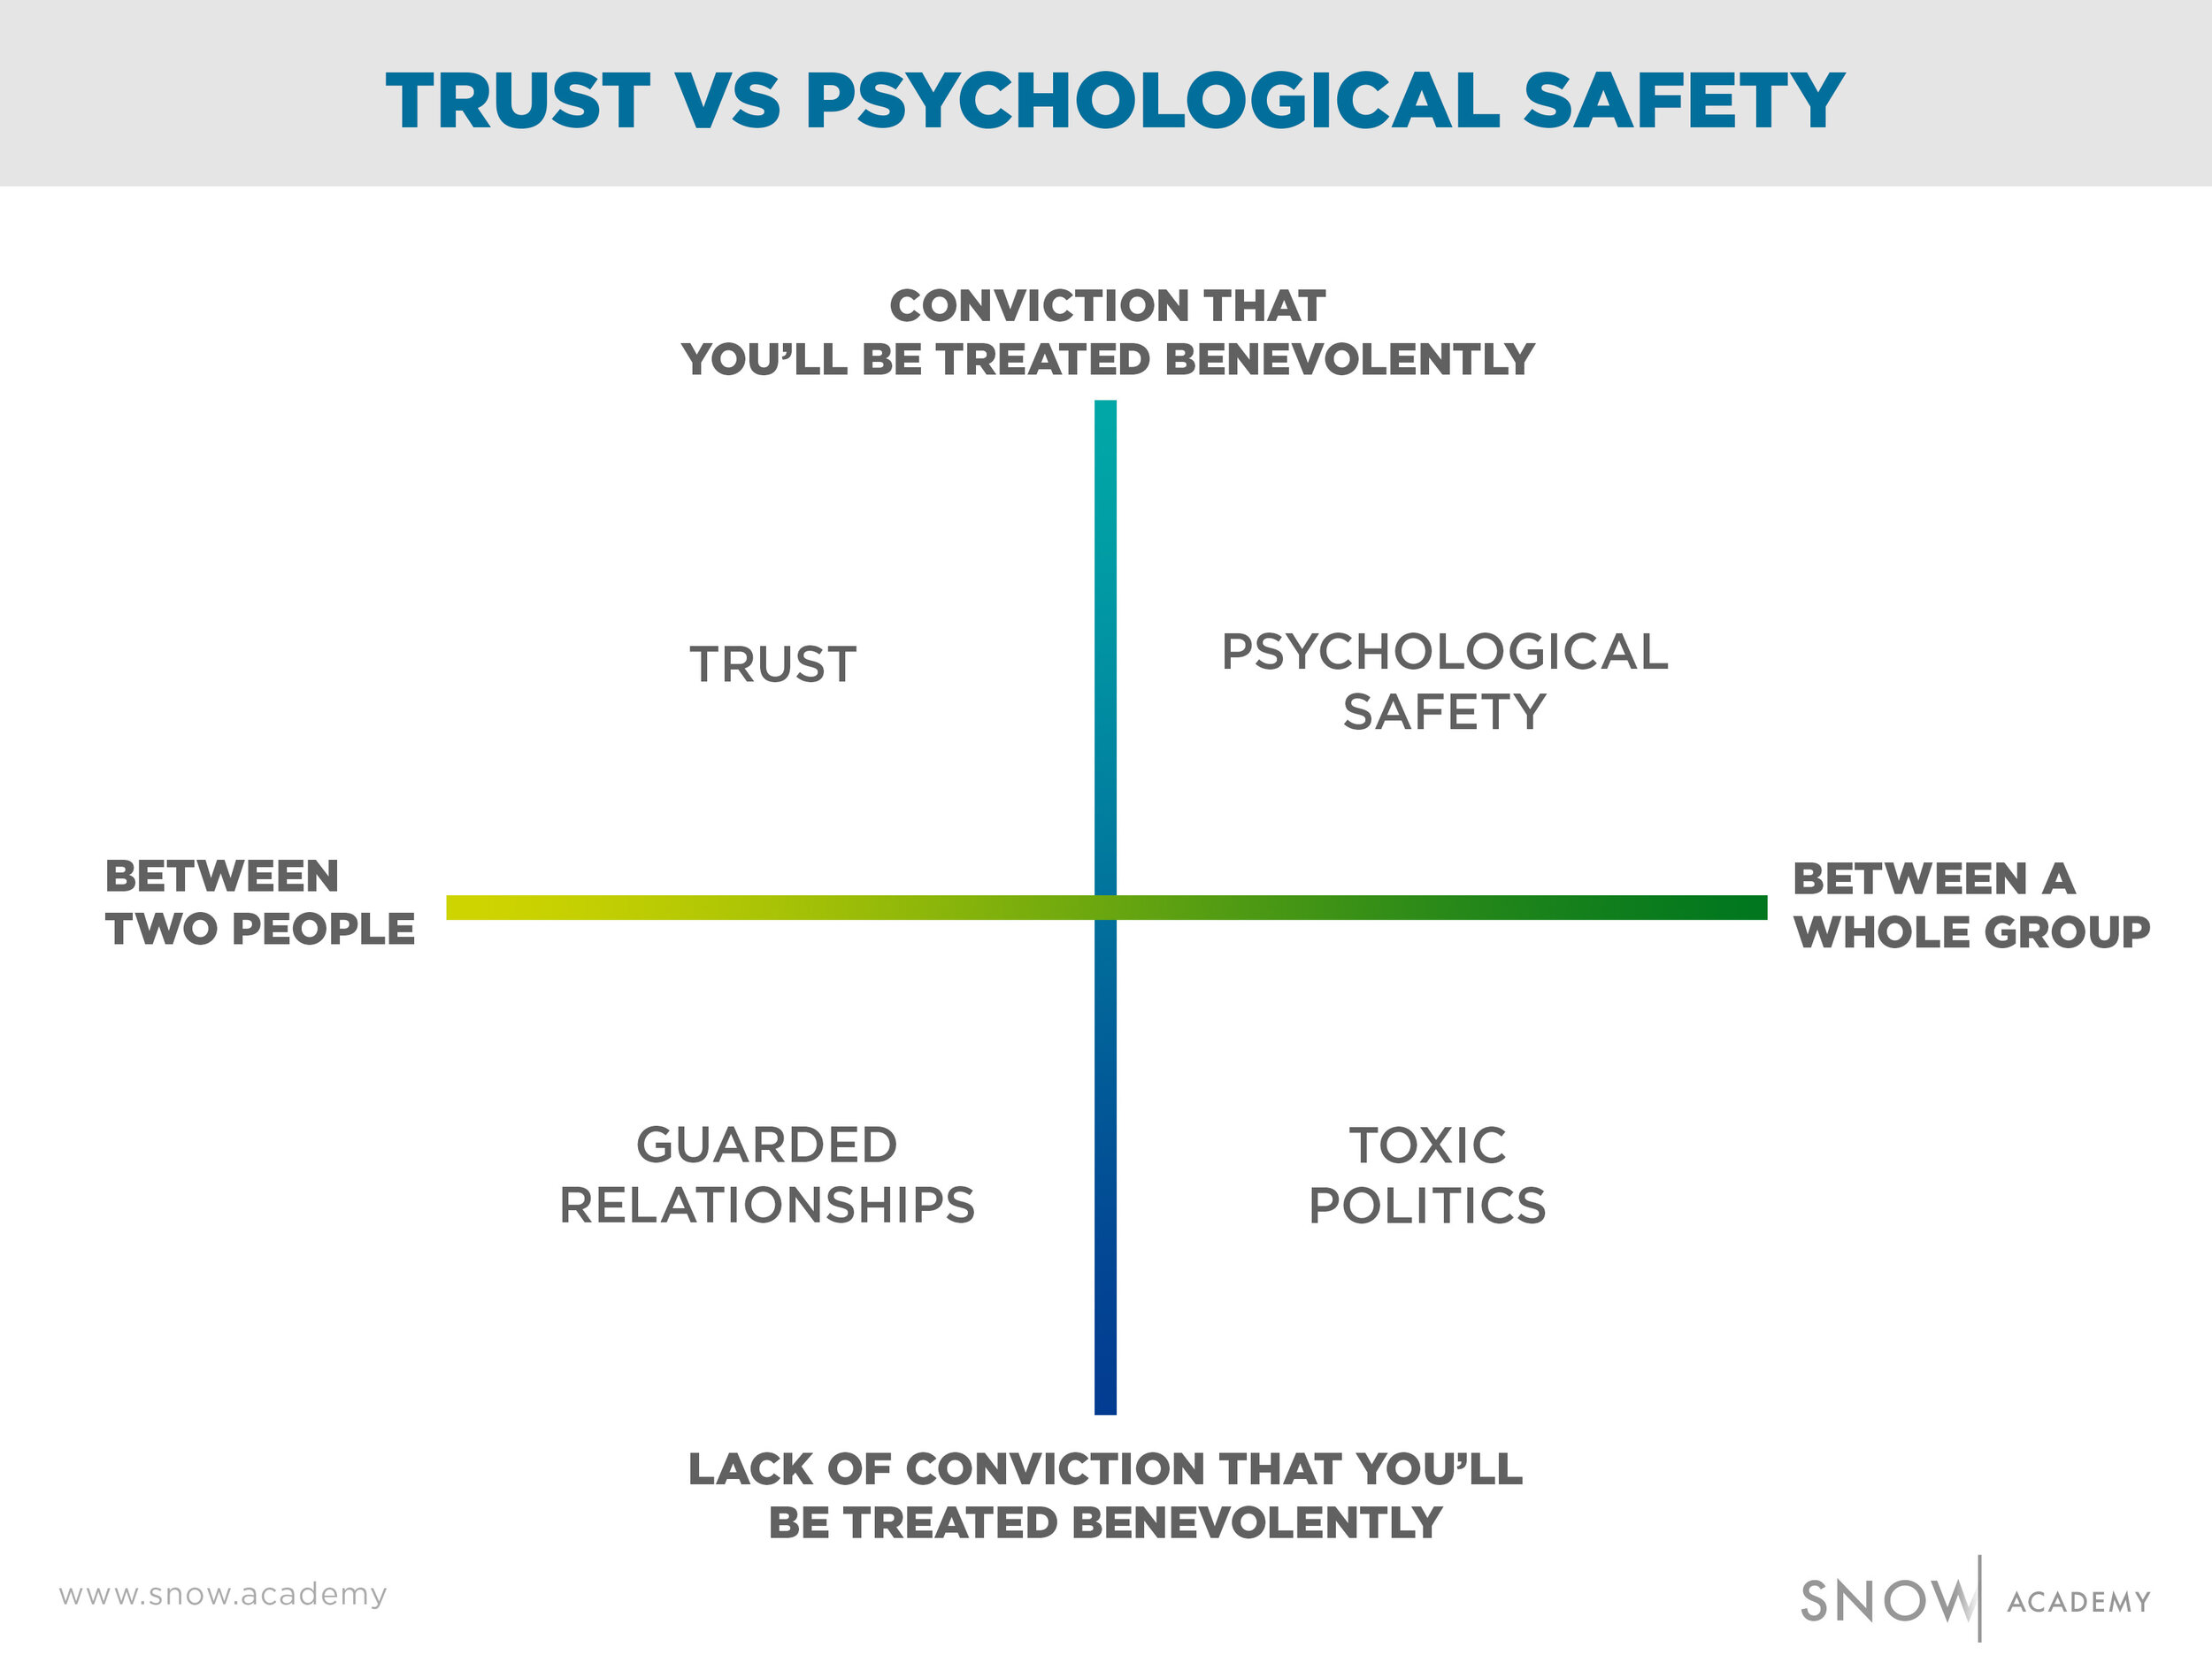 tl/dr psychological safety is a commitment to treat each other charitably